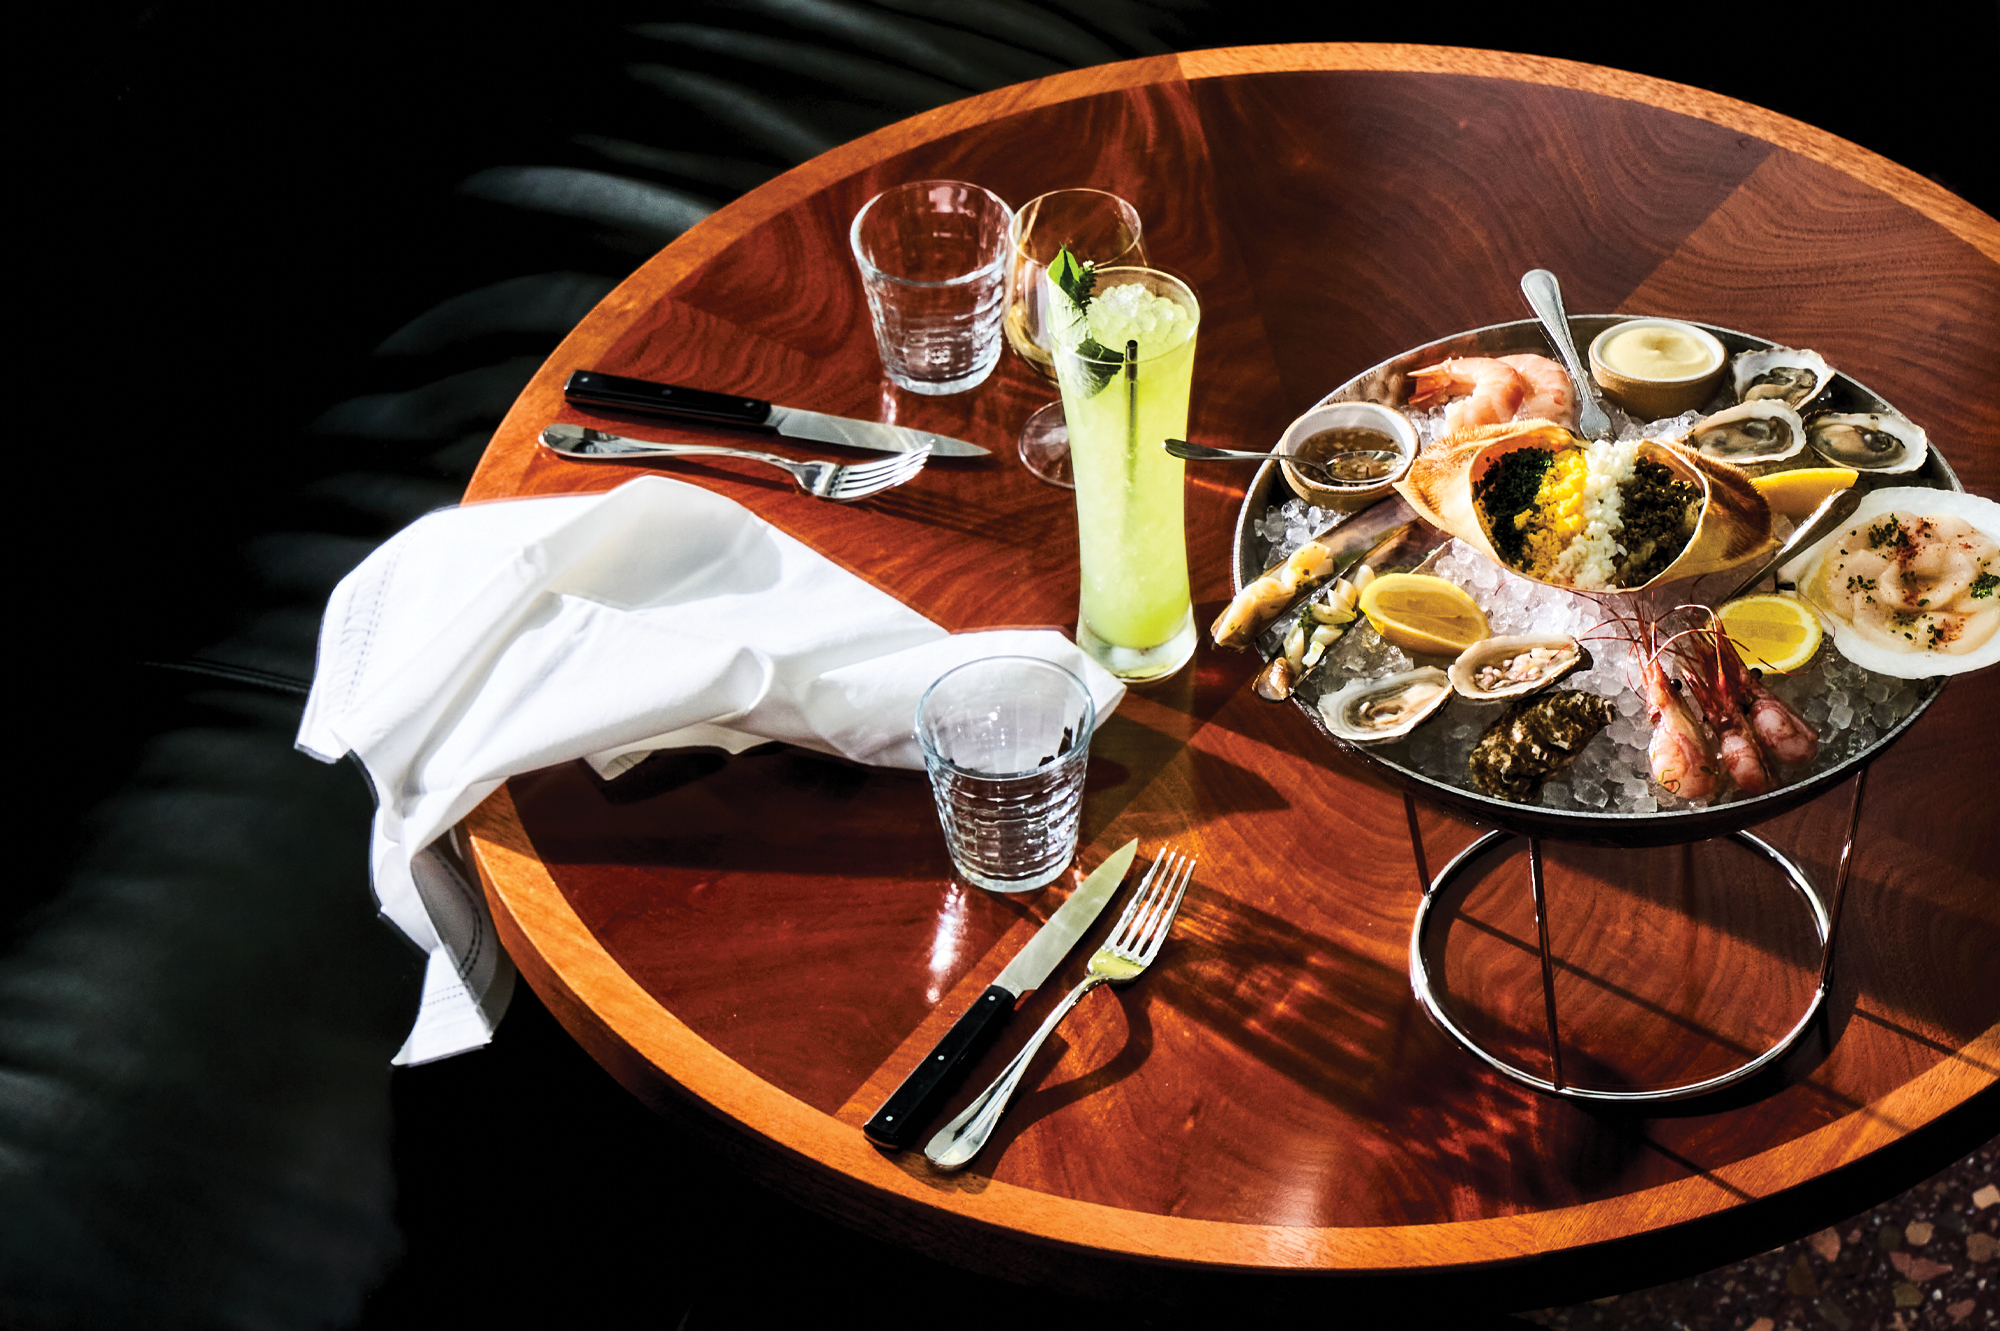 A seafood platter on ice on a wooden table with glasses and cutlery.